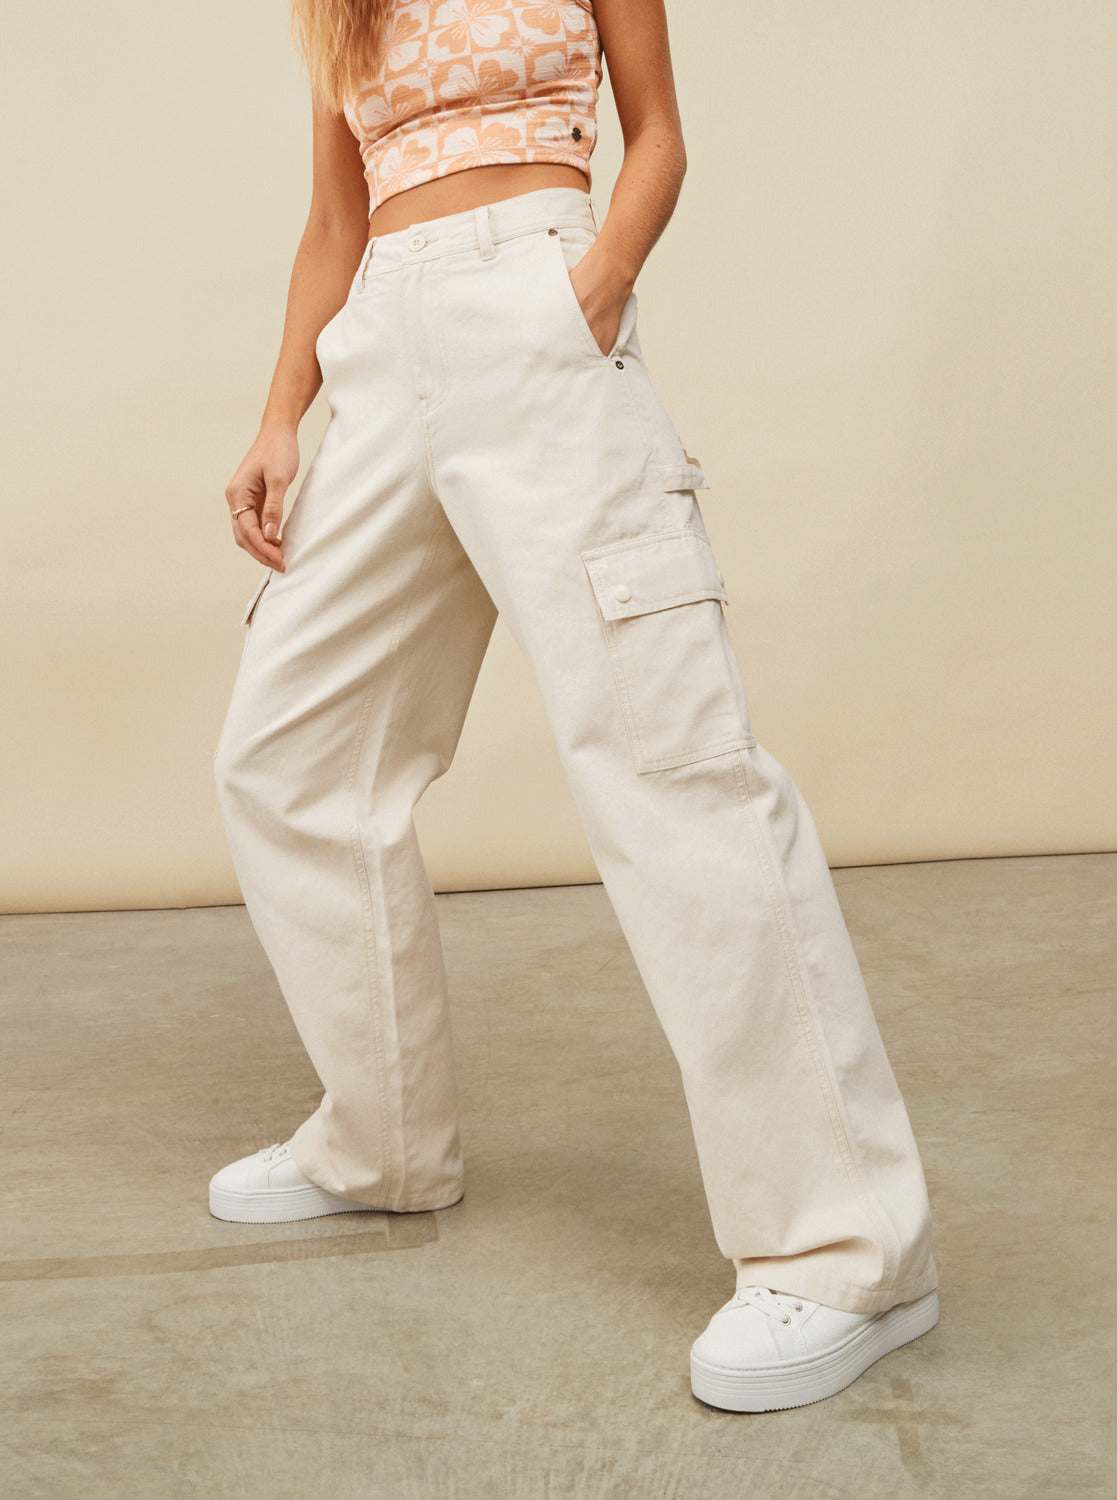 Roxy Lefty Cargo Pants - Sum23 cream pant with side pockets 